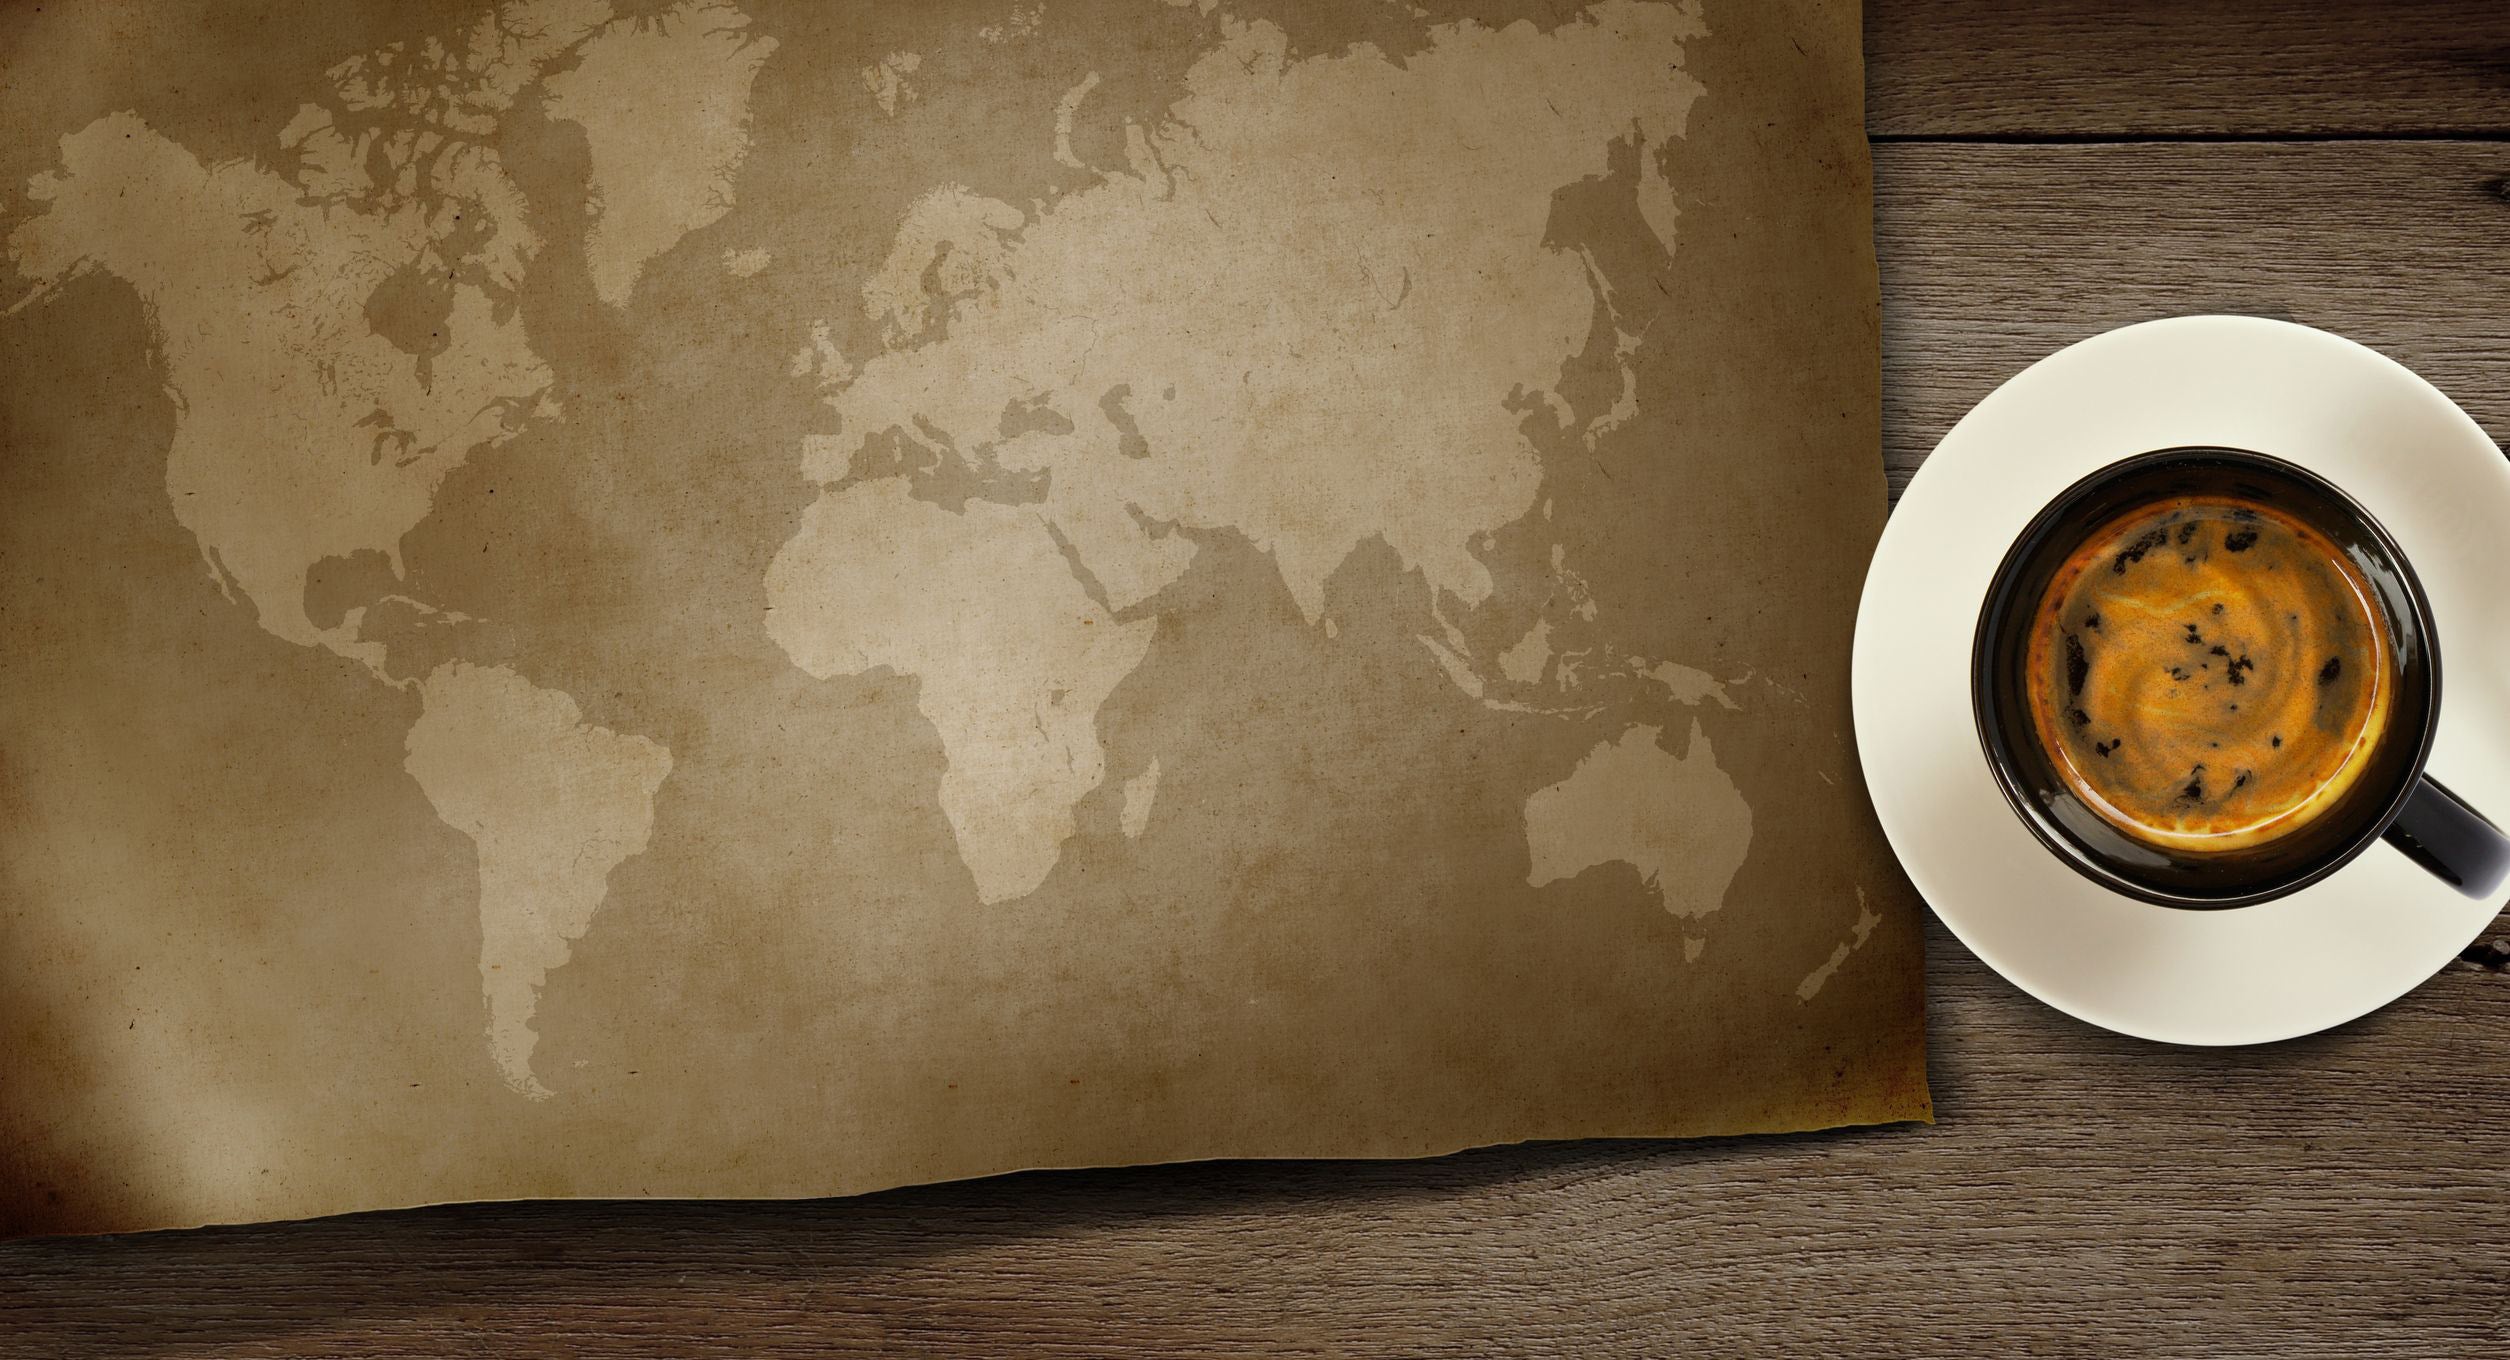 A coffee cup next to a world map